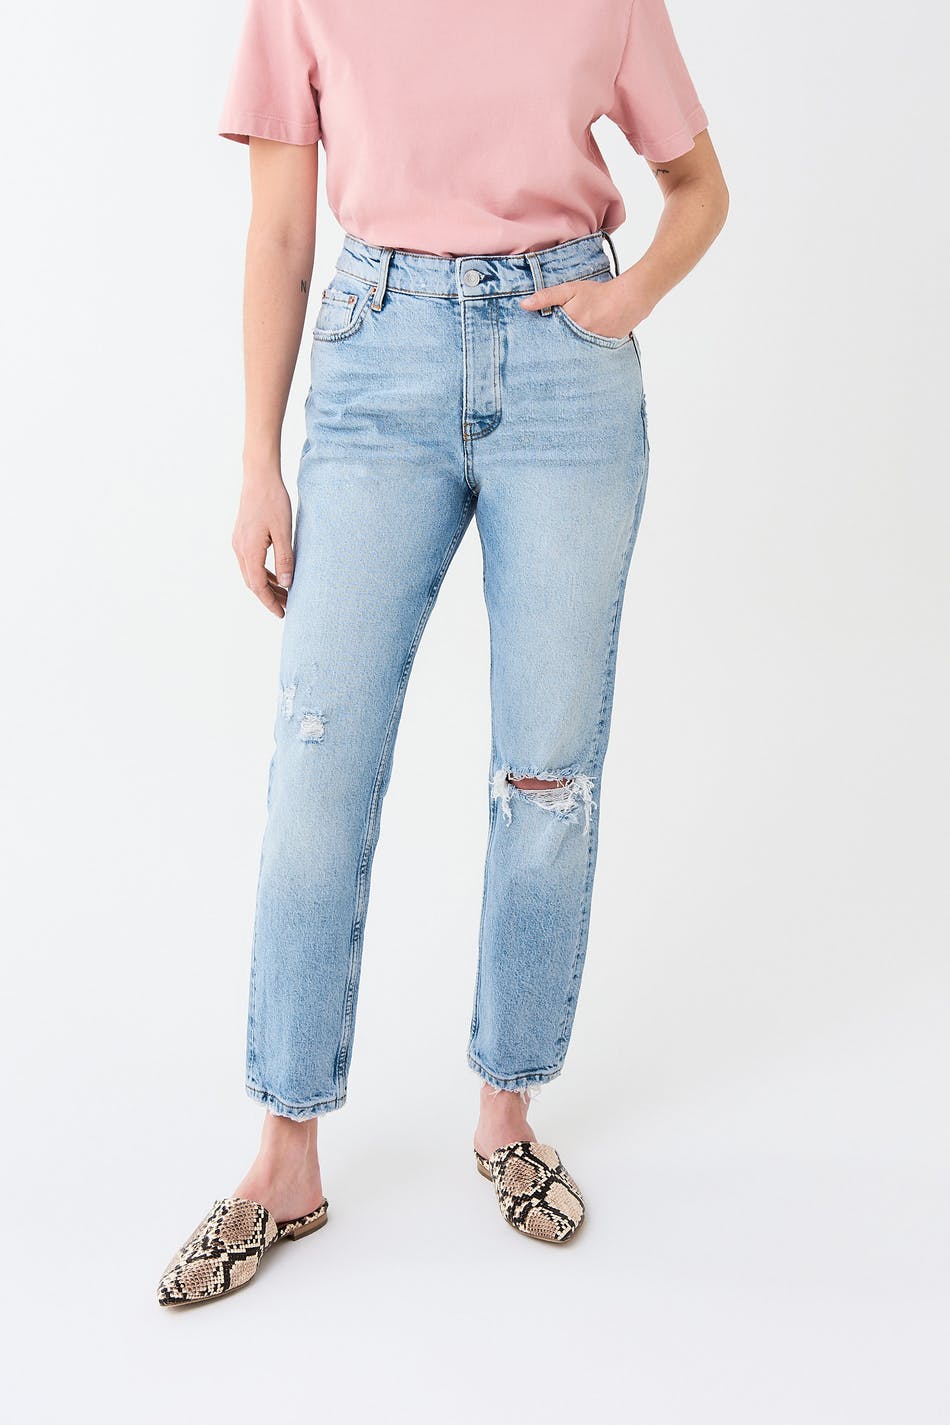 gina tricot petite jeans